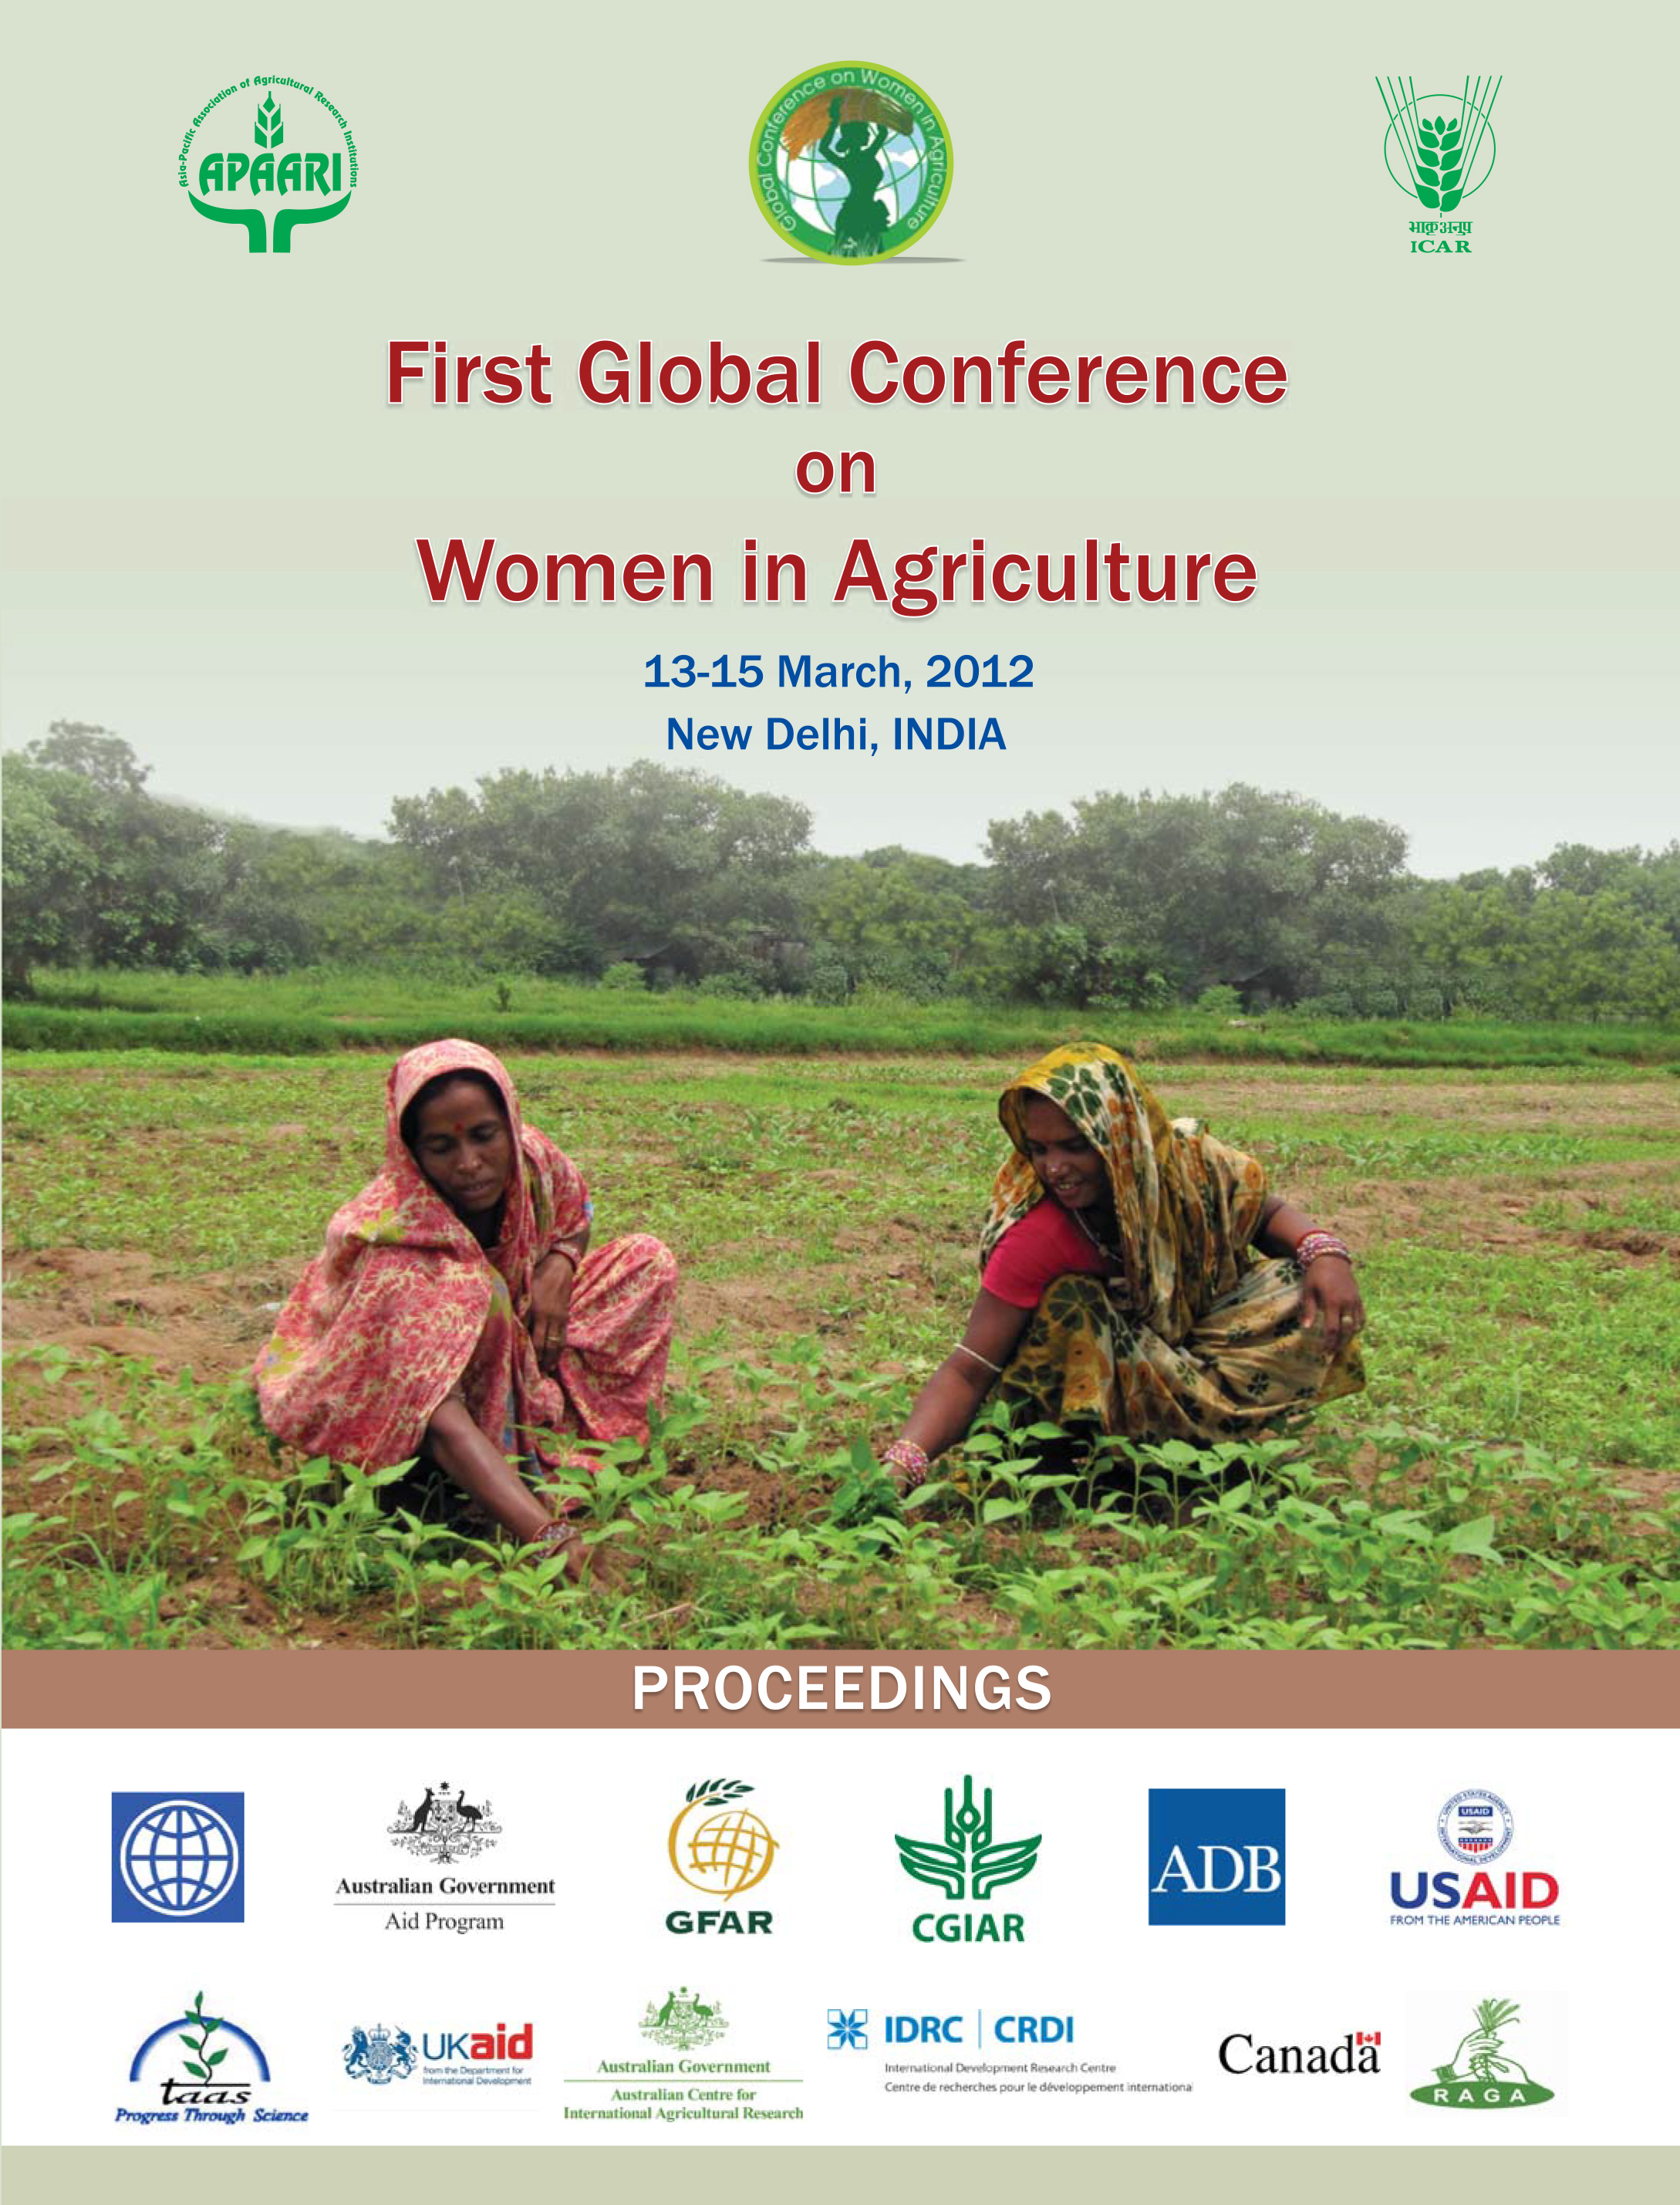 The proceedings of the first Global Conference on Women in Agriculture